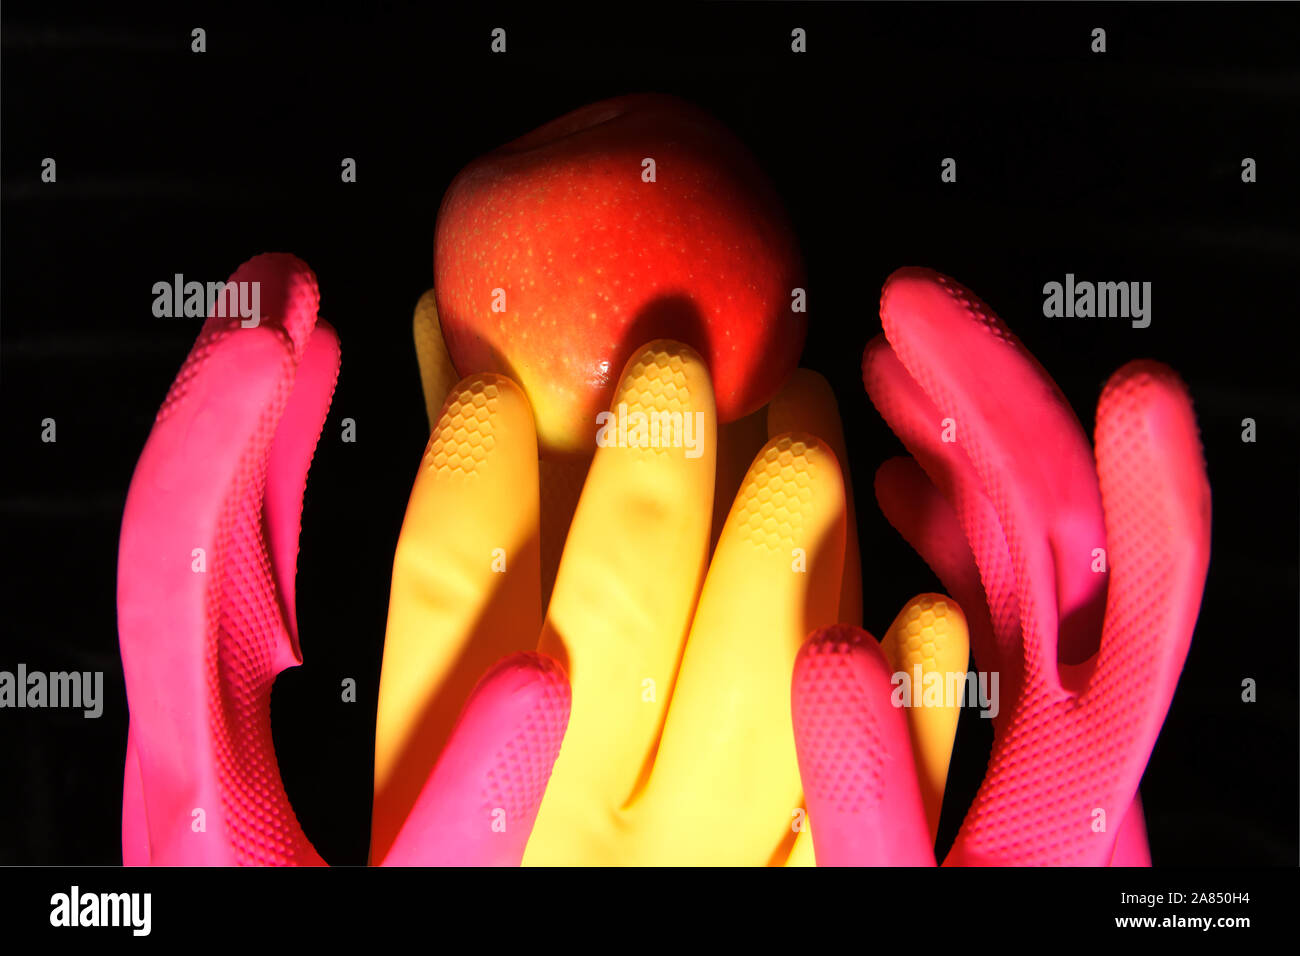 Abstract composition with rubber gloves and an apple Stock Photo